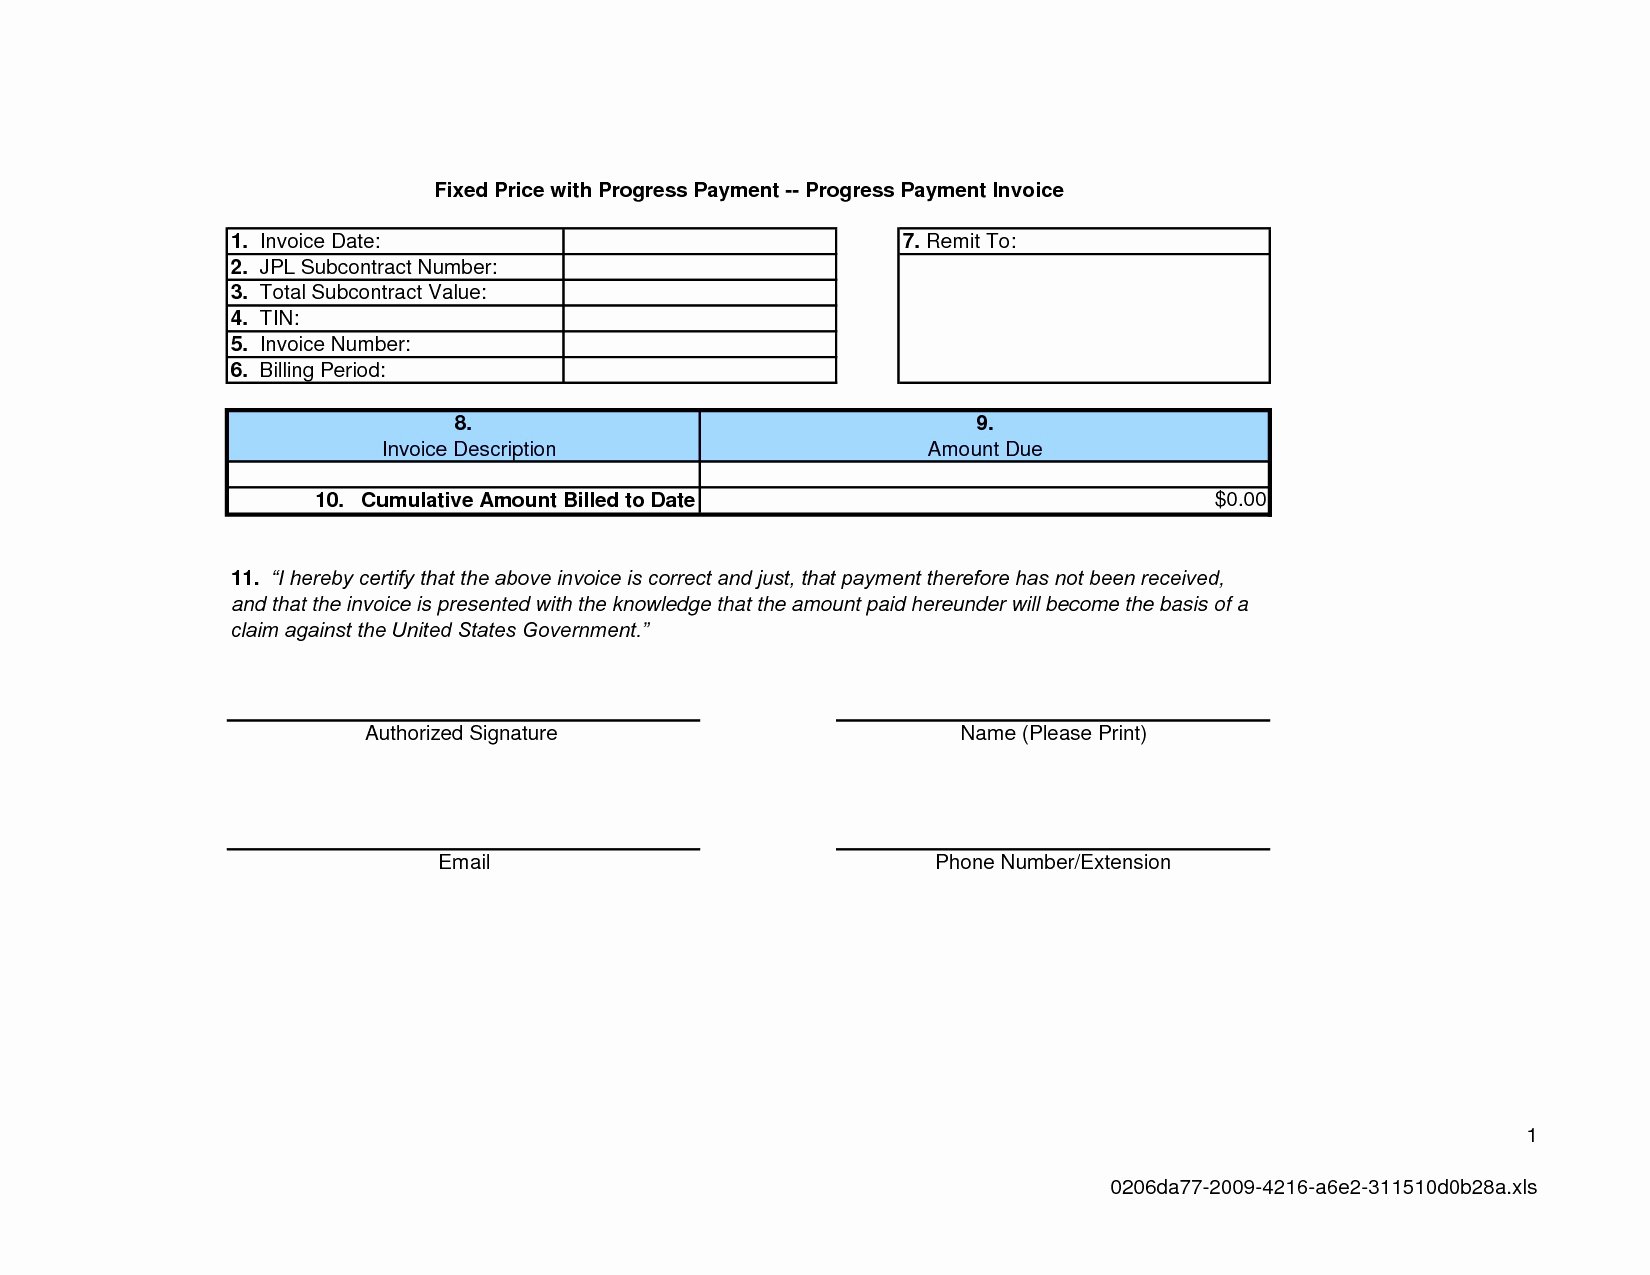 Paid Invoice Receipt Template Beautiful Paid Invoice Template Spreadsheet Payment Receipt format